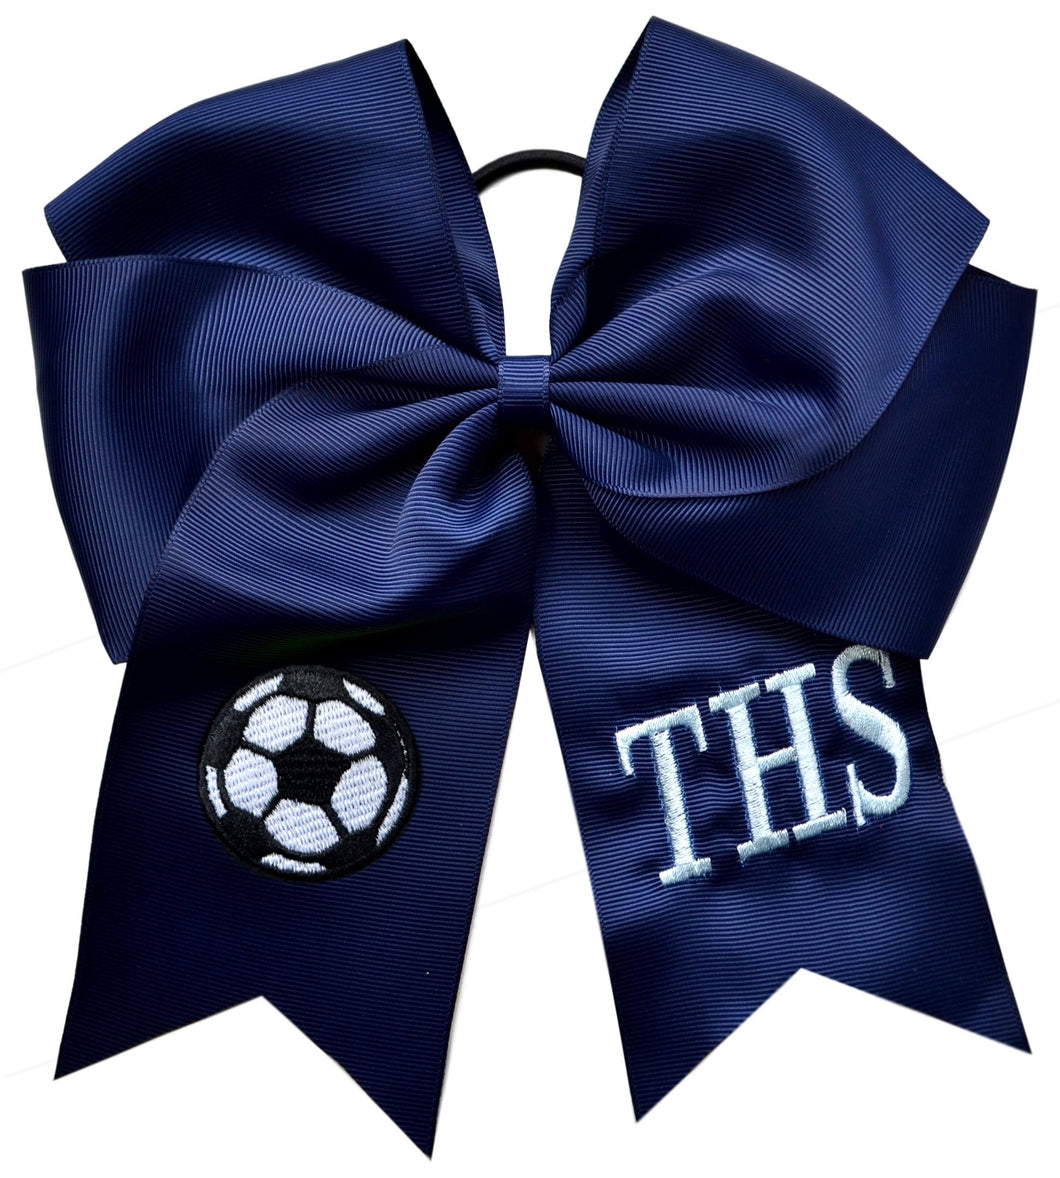 Soccer Hair Bow Embroidered and Personalized with Custom Initials of your choice - 7.5 Inches Long!